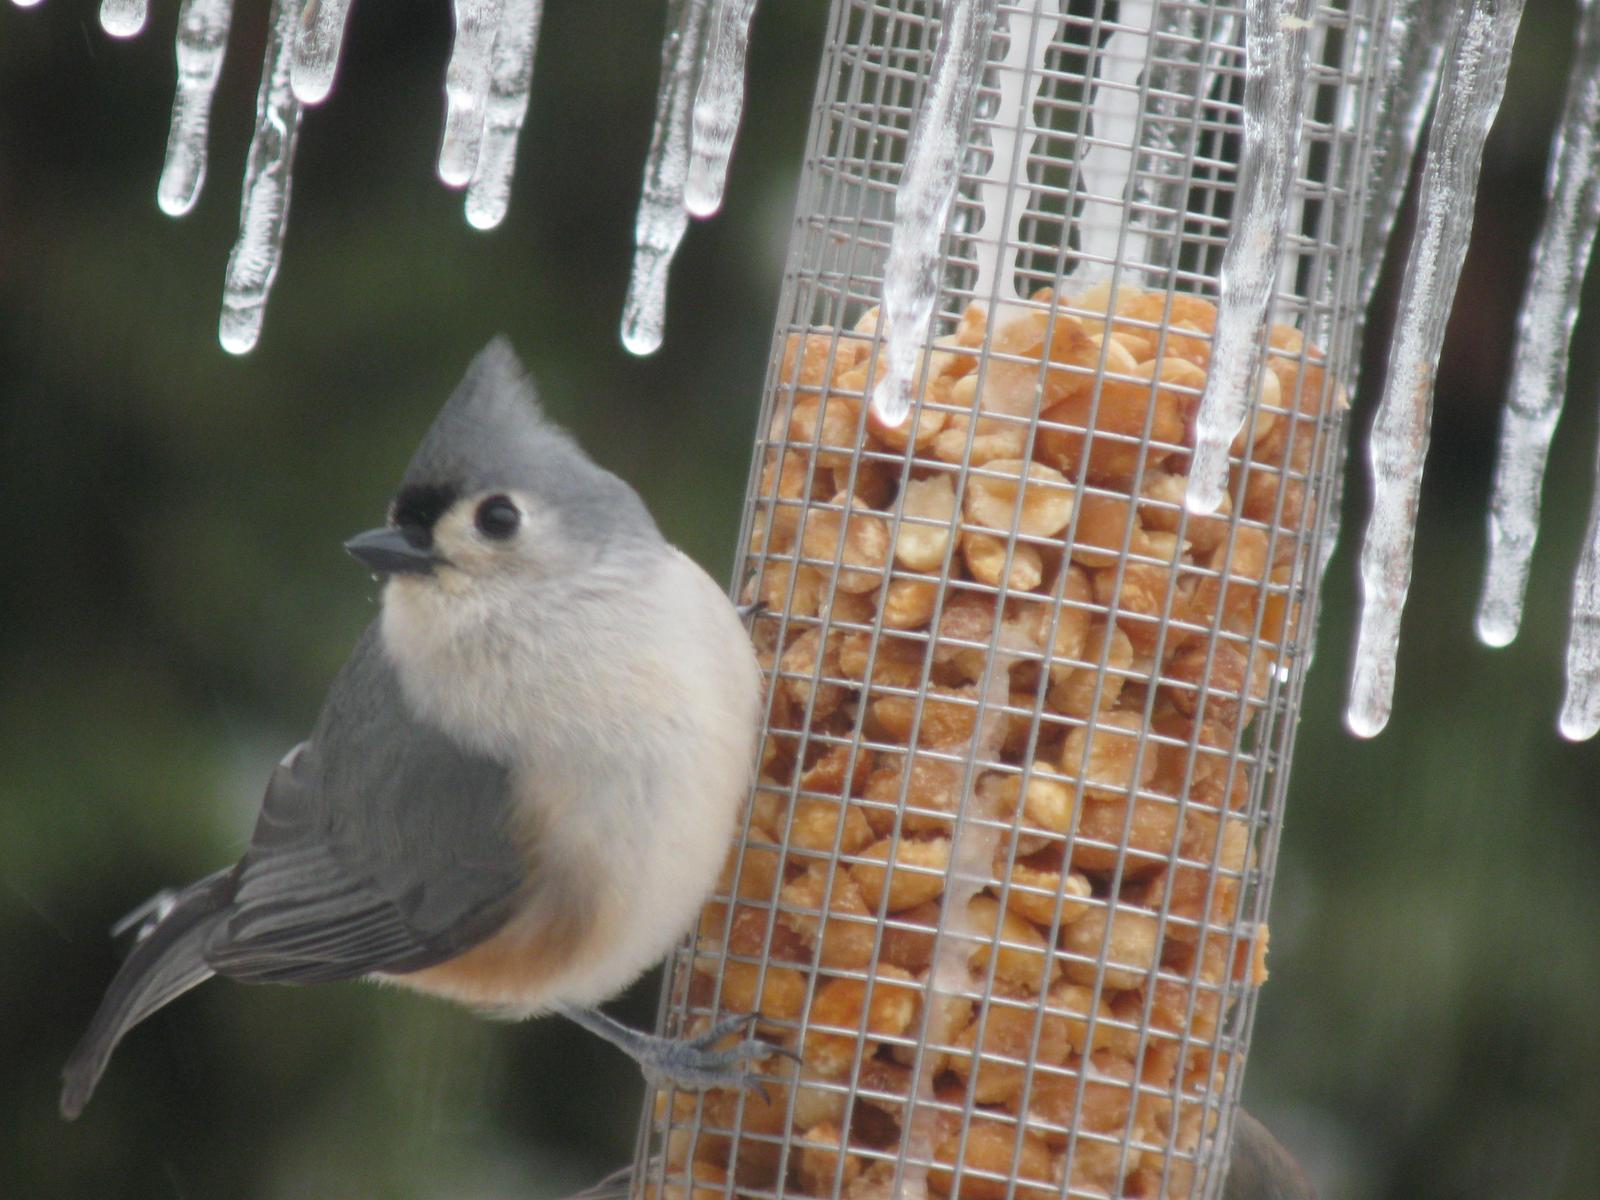 Tufted Titmouse Photo by Melinda Calabrese